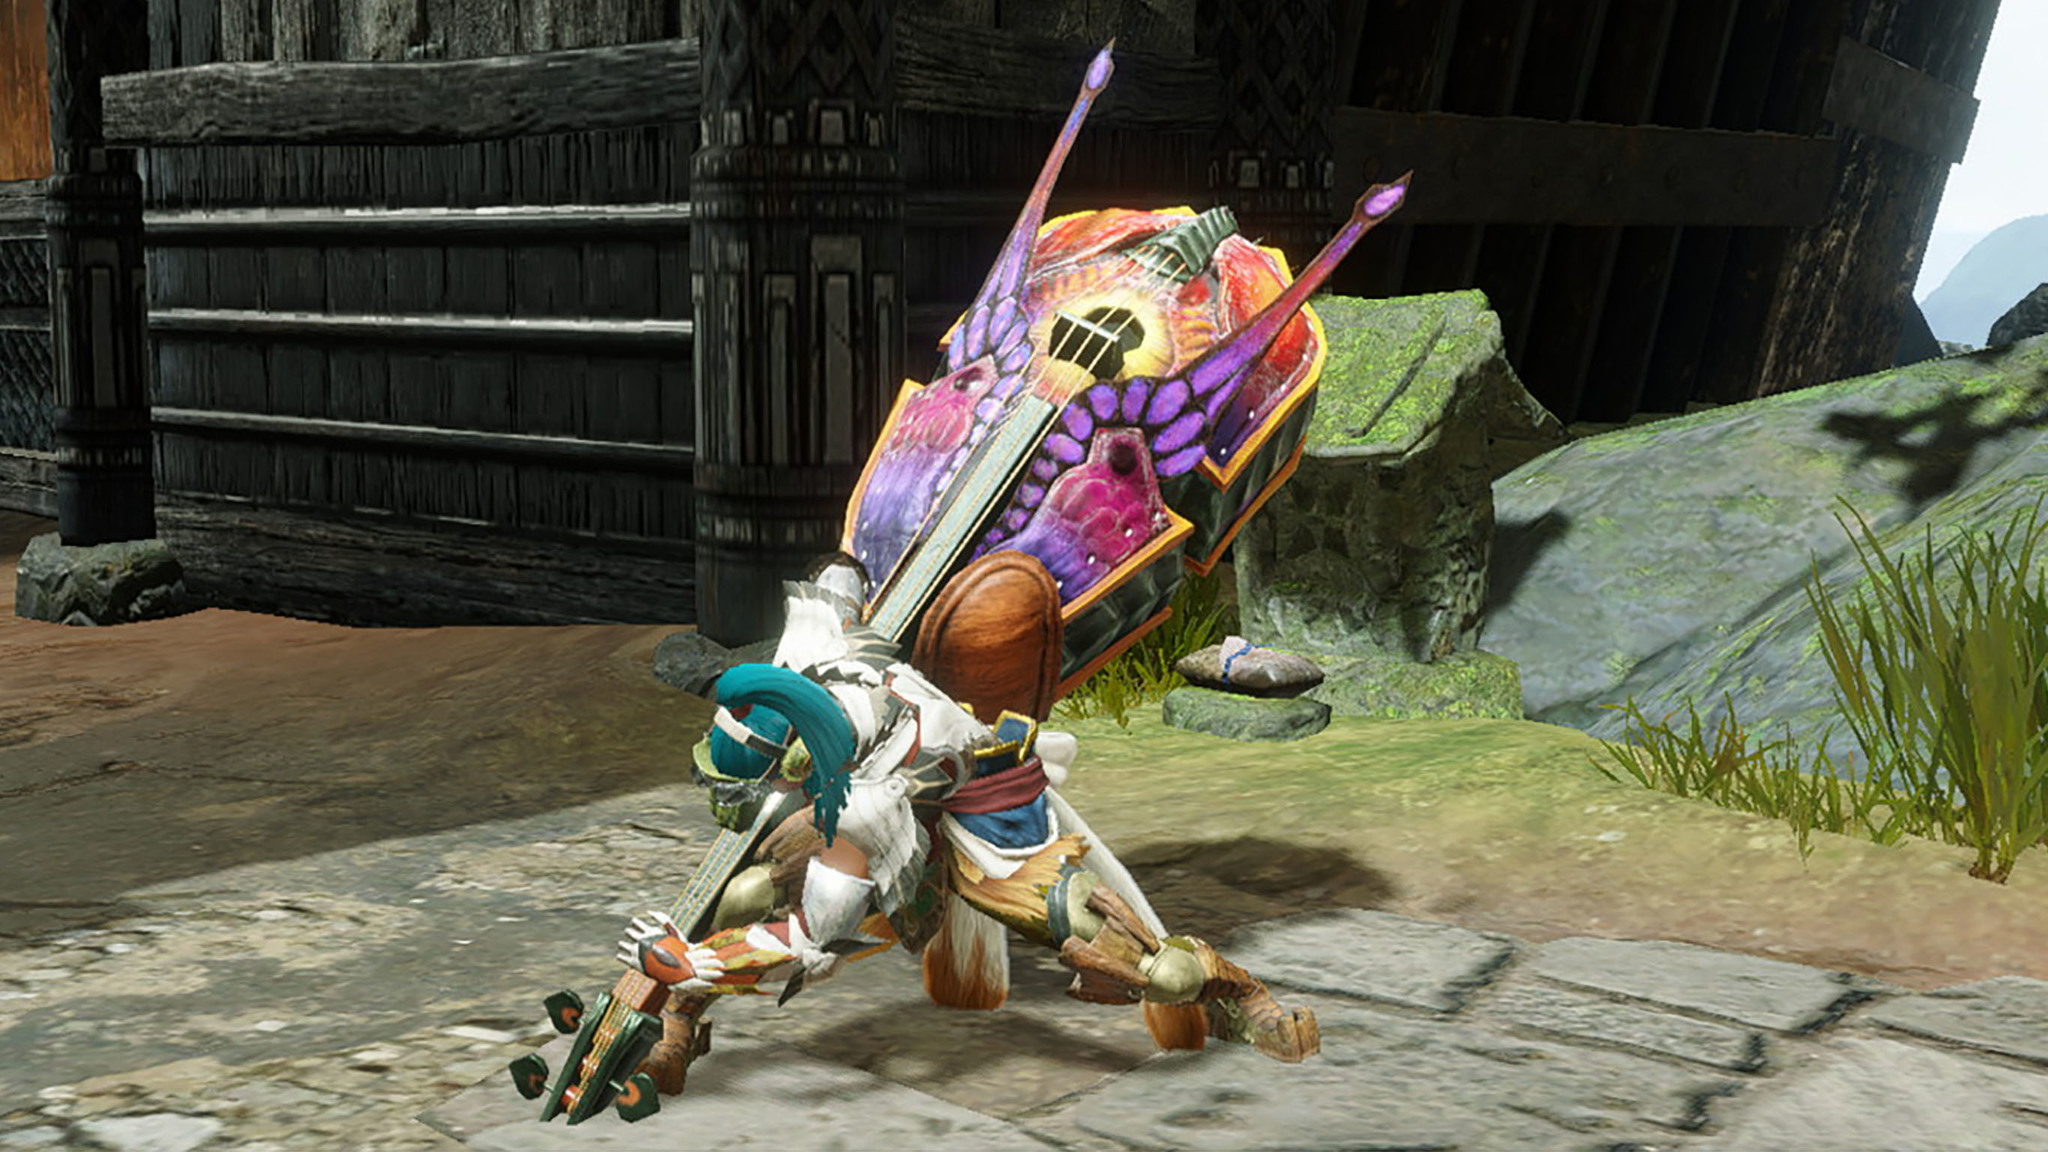 Monster Hunter: Massive Hunting Coming To Android And iOS This Year